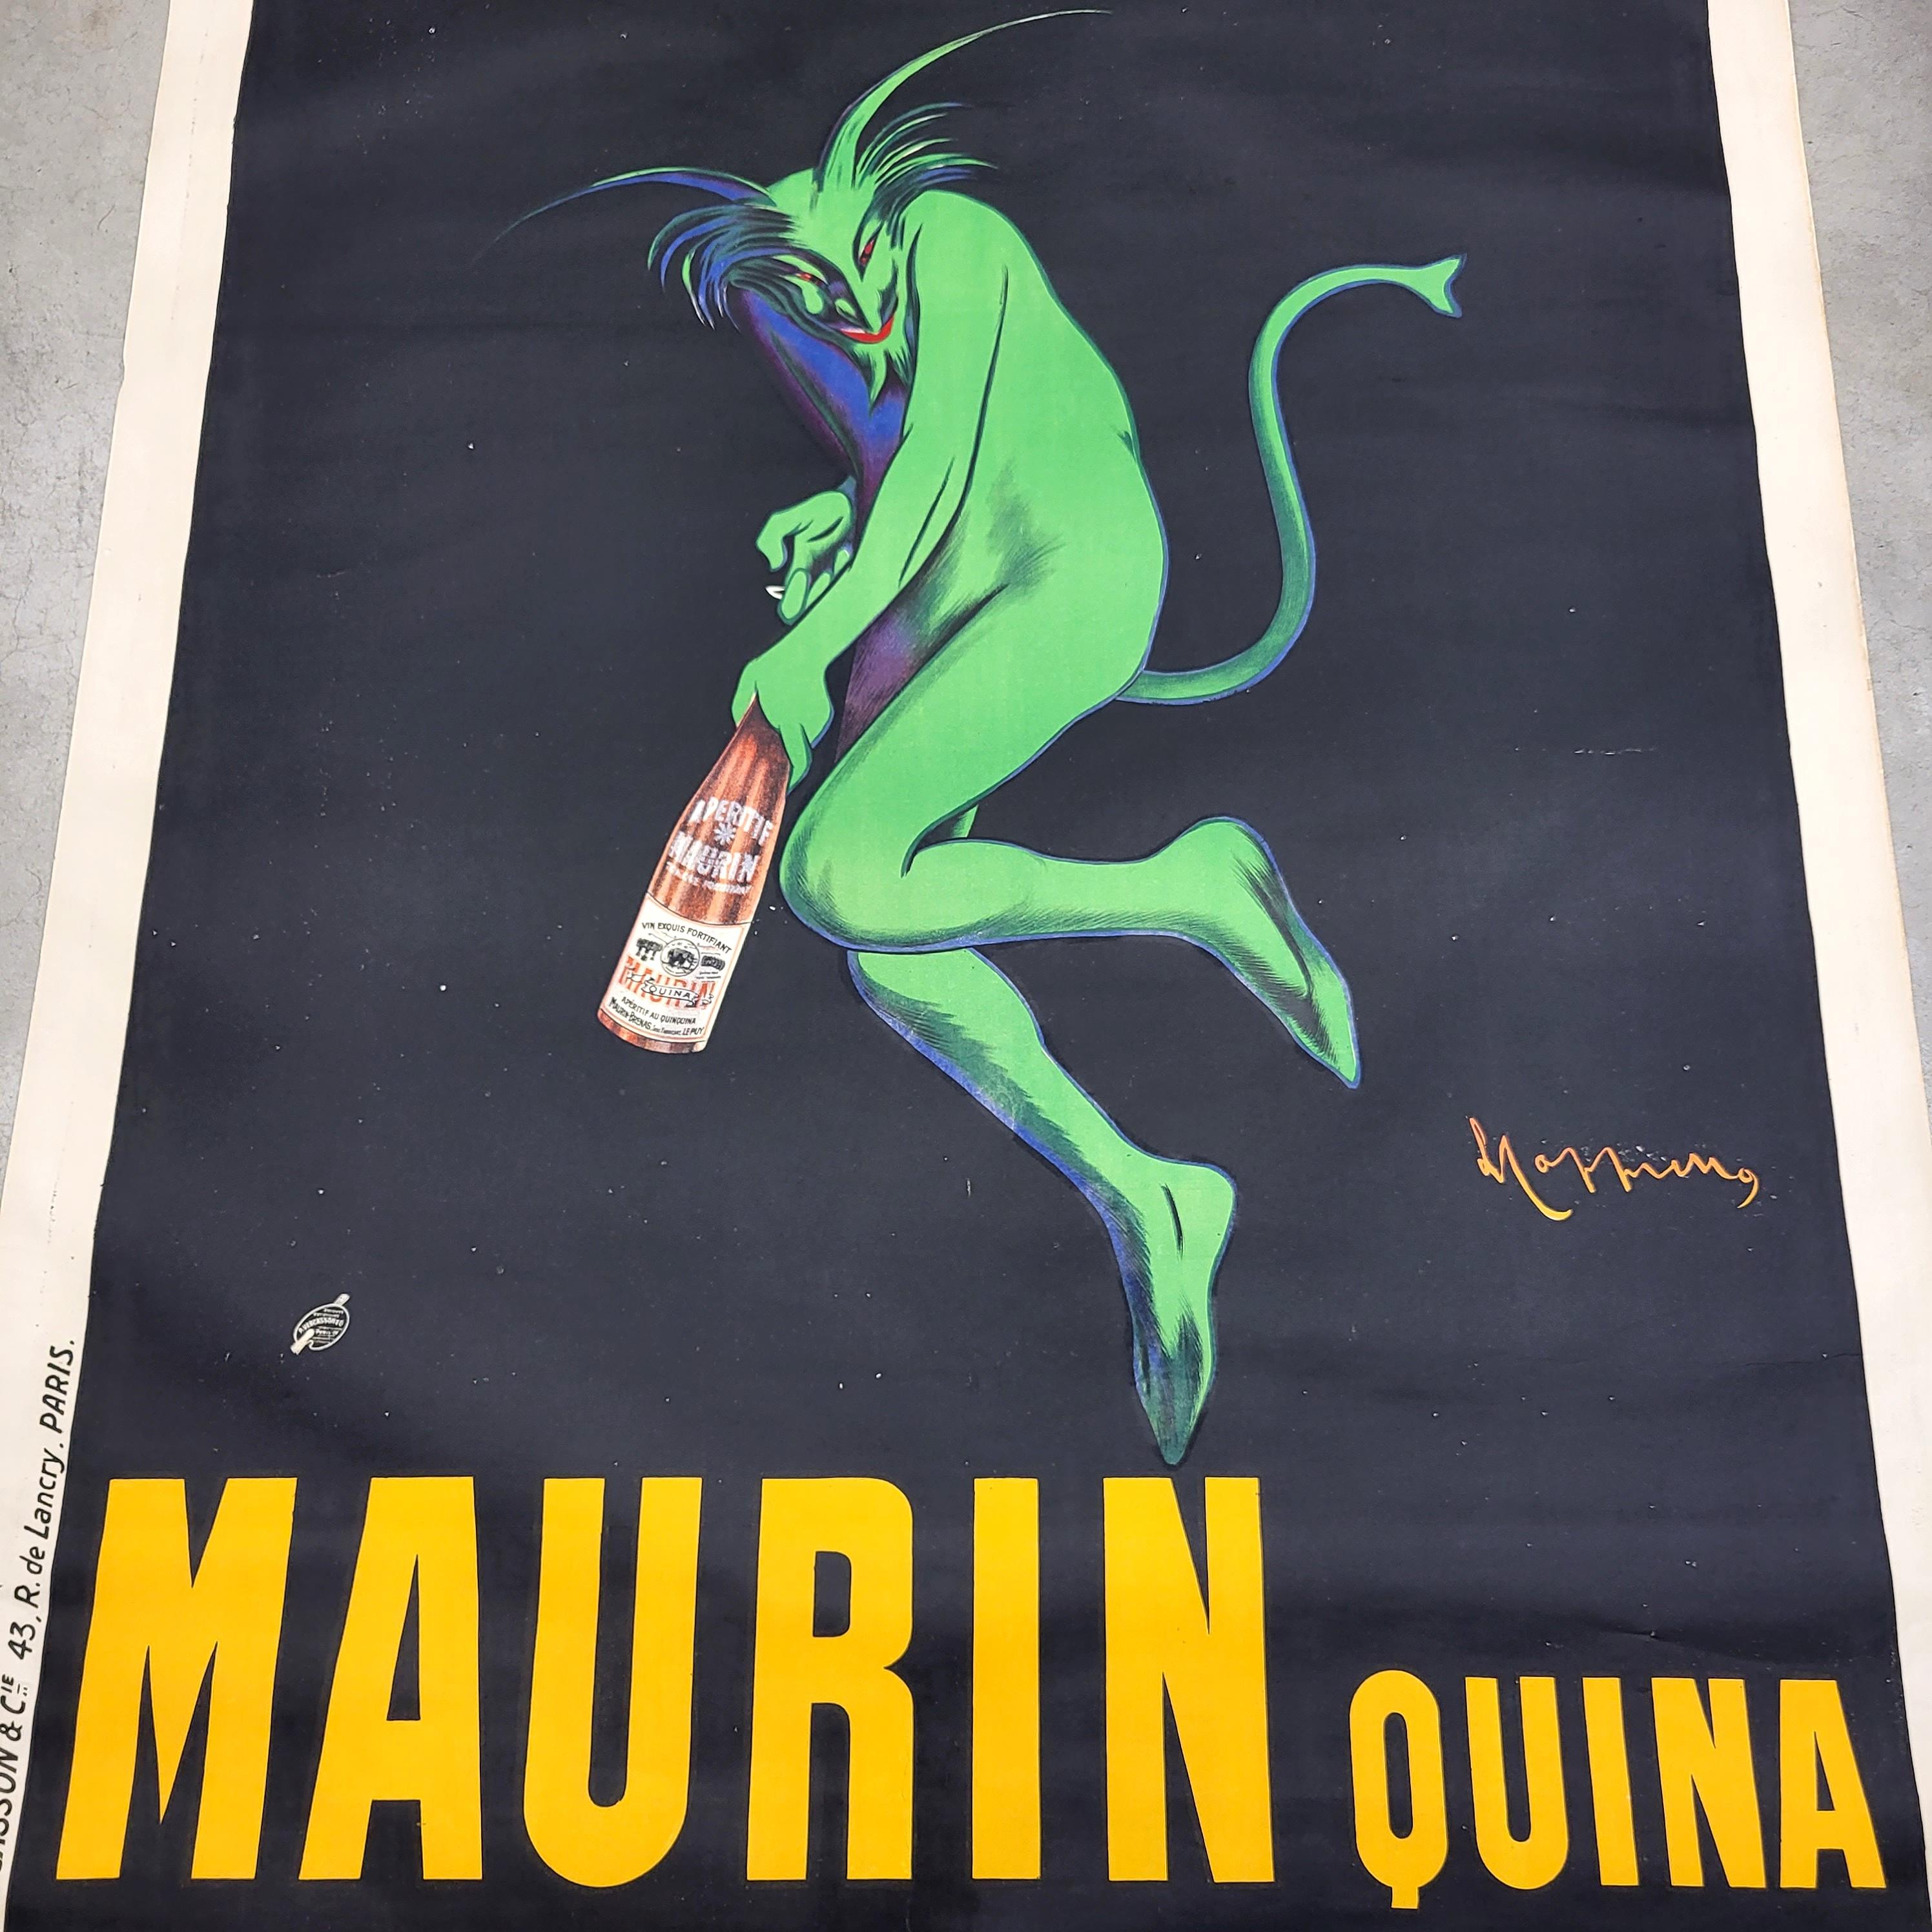 Very rare original vintage 1st printing poster by Leonetto Cappiello.

Maurin’s apéritif was only fairly recently reintroduced to French and international markets—more than a century after it faded into obscurity the same year this poster was